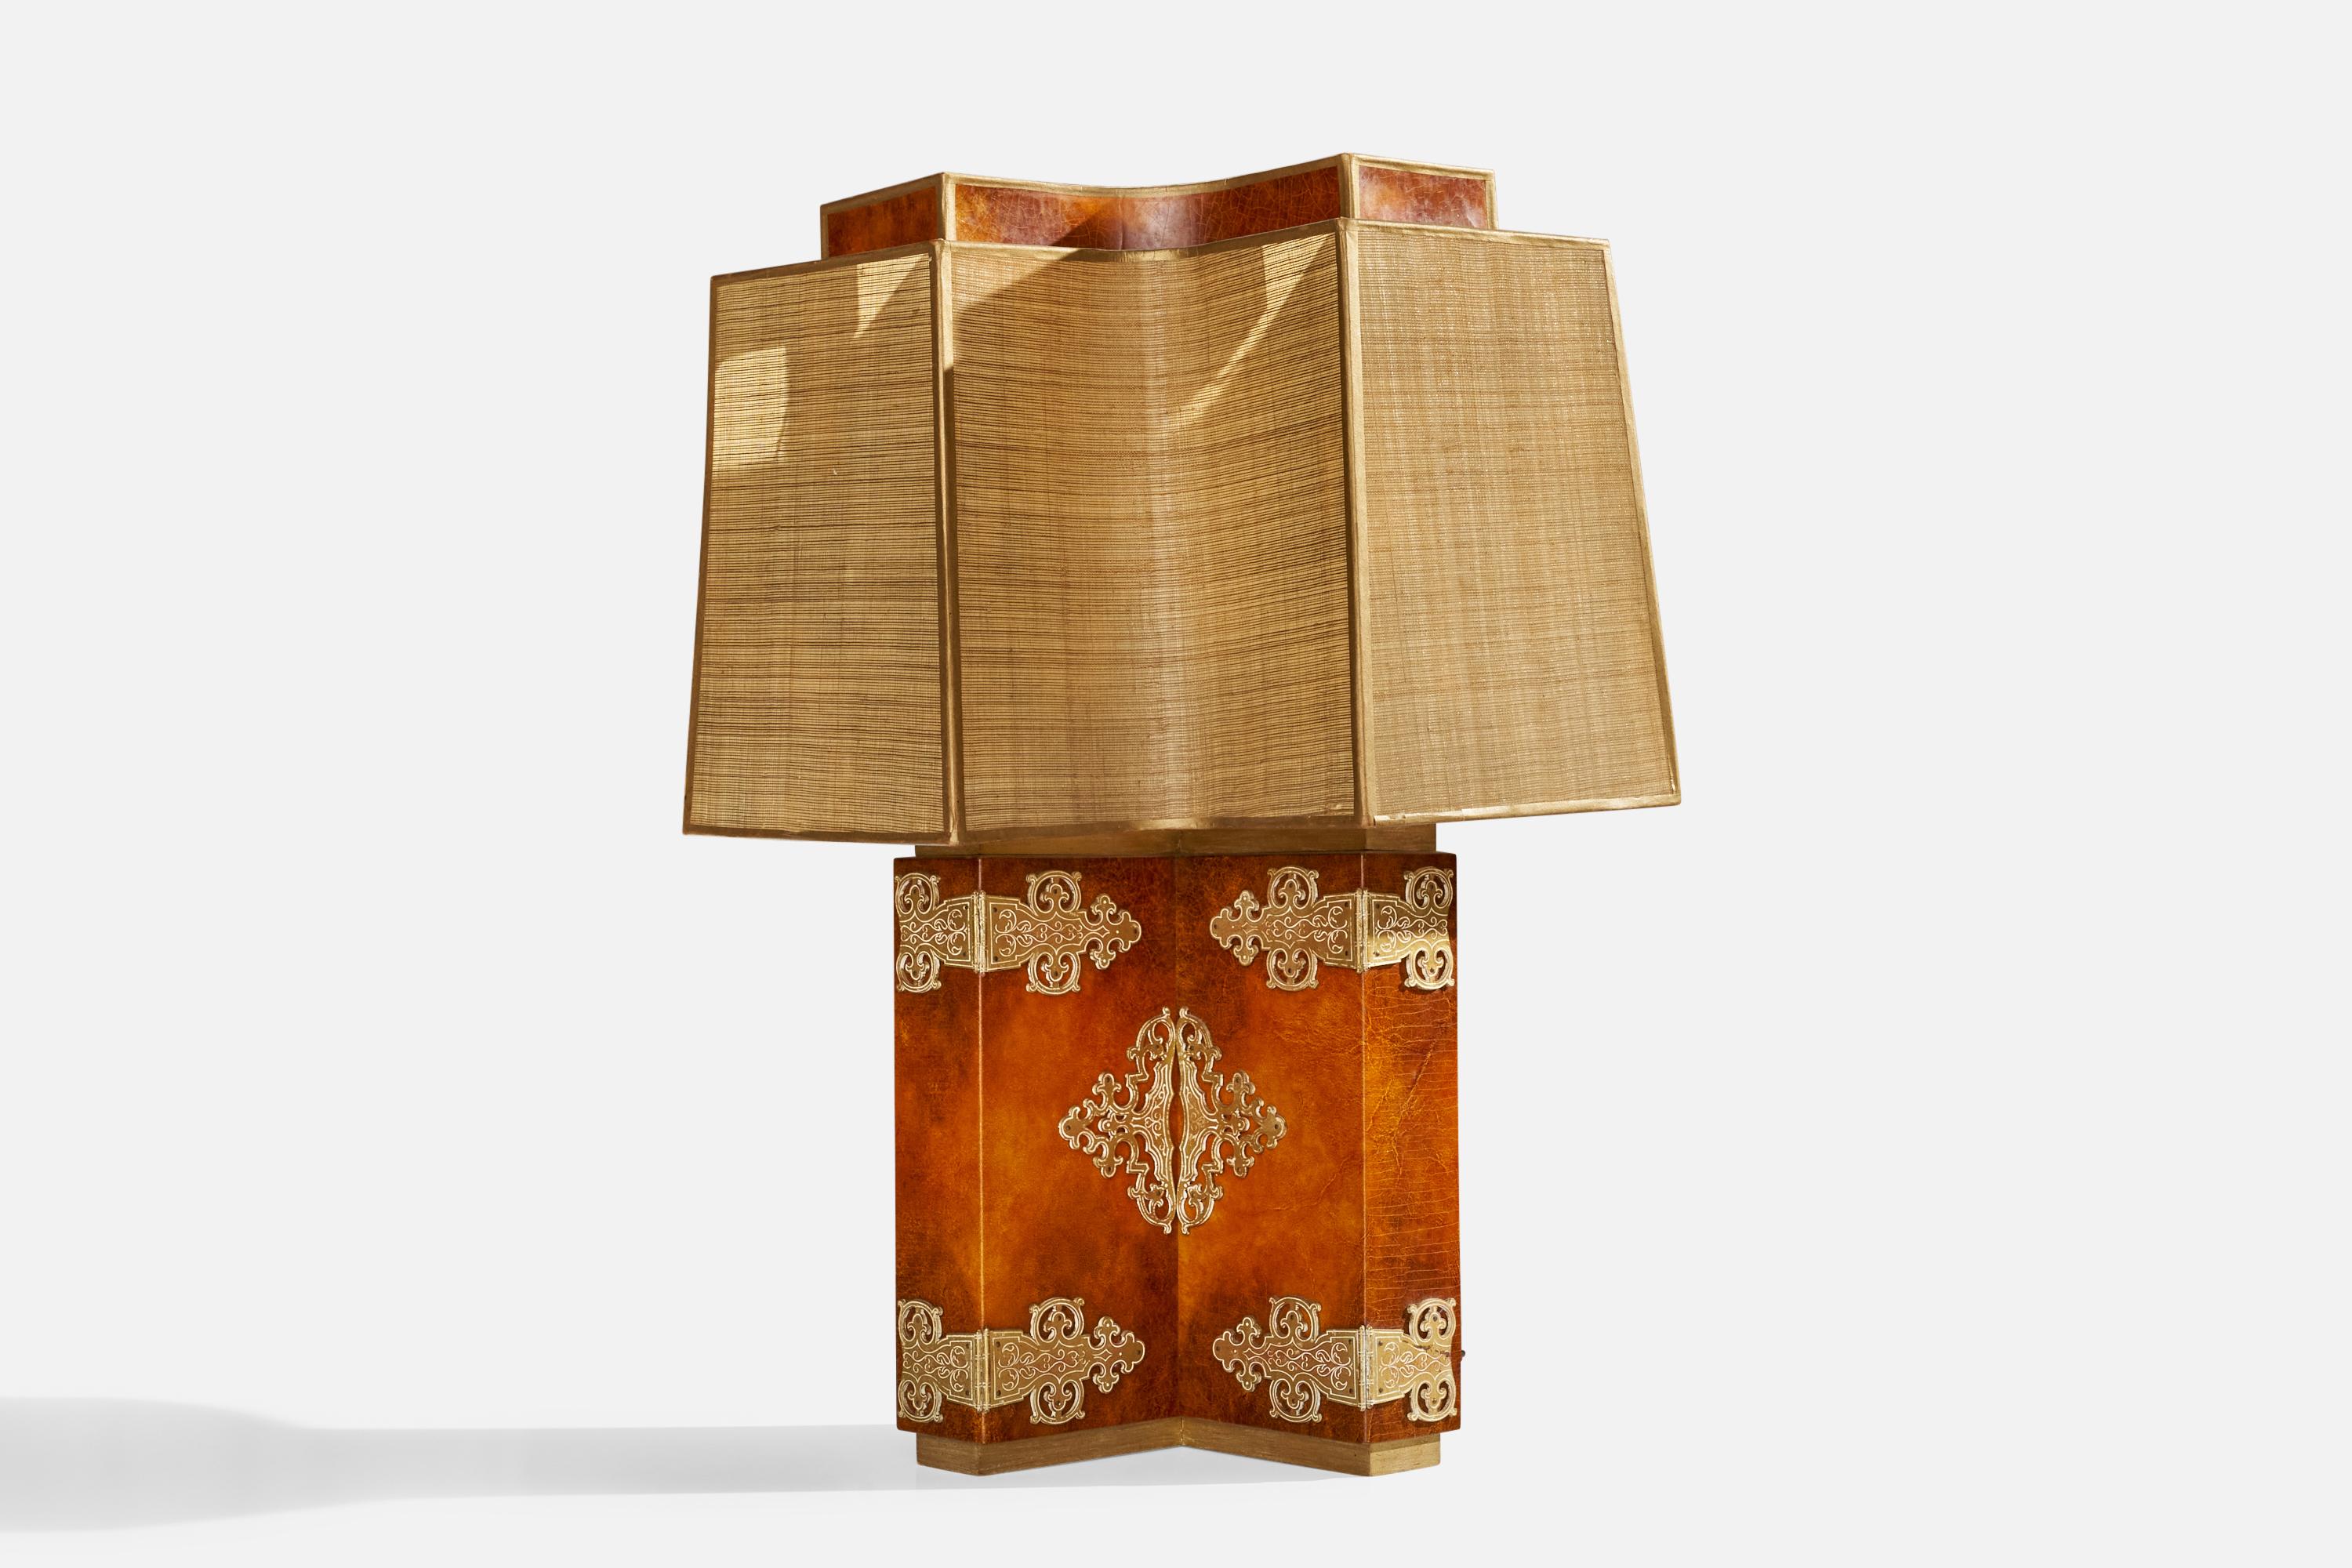 A gilt and painted wood, raffia and painted fiberglass table lamp designed and produced in the US, c. 1950s.

Overall Dimensions (inches): 33.5” H x 26” W x 8” D
Stated dimensions include shade.
Bulb Specifications: E-26 Bulb
Number of Sockets: